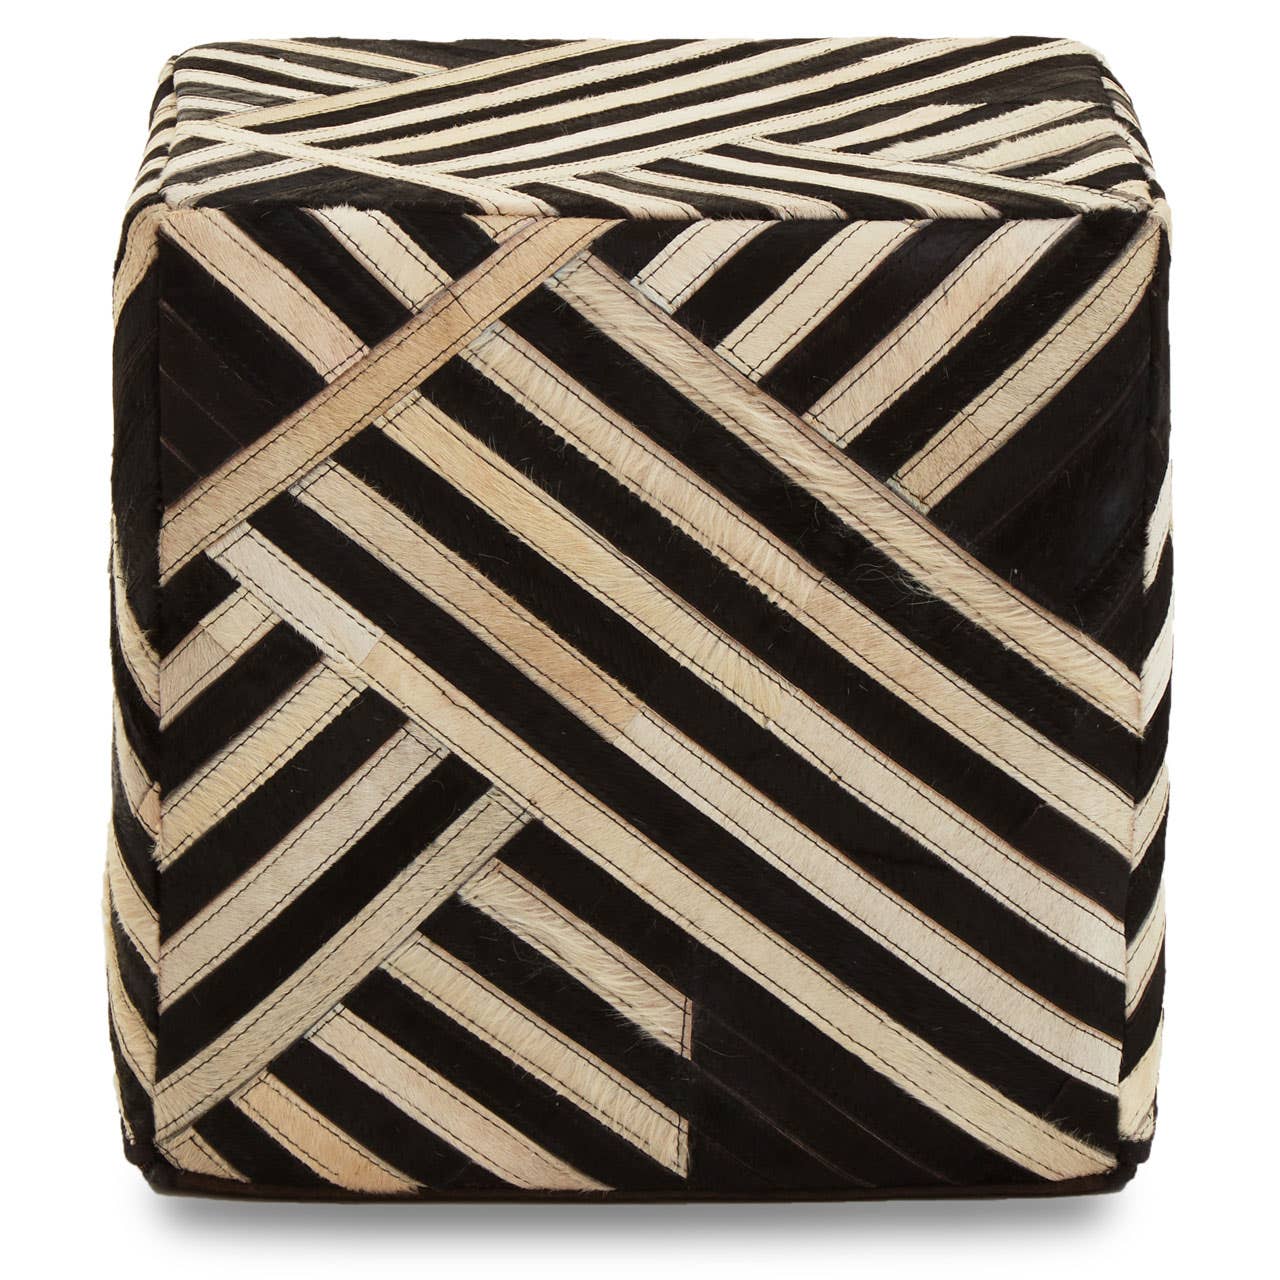 Mayfair Vivid Monochrome Abstract Leather Pouffe Chair